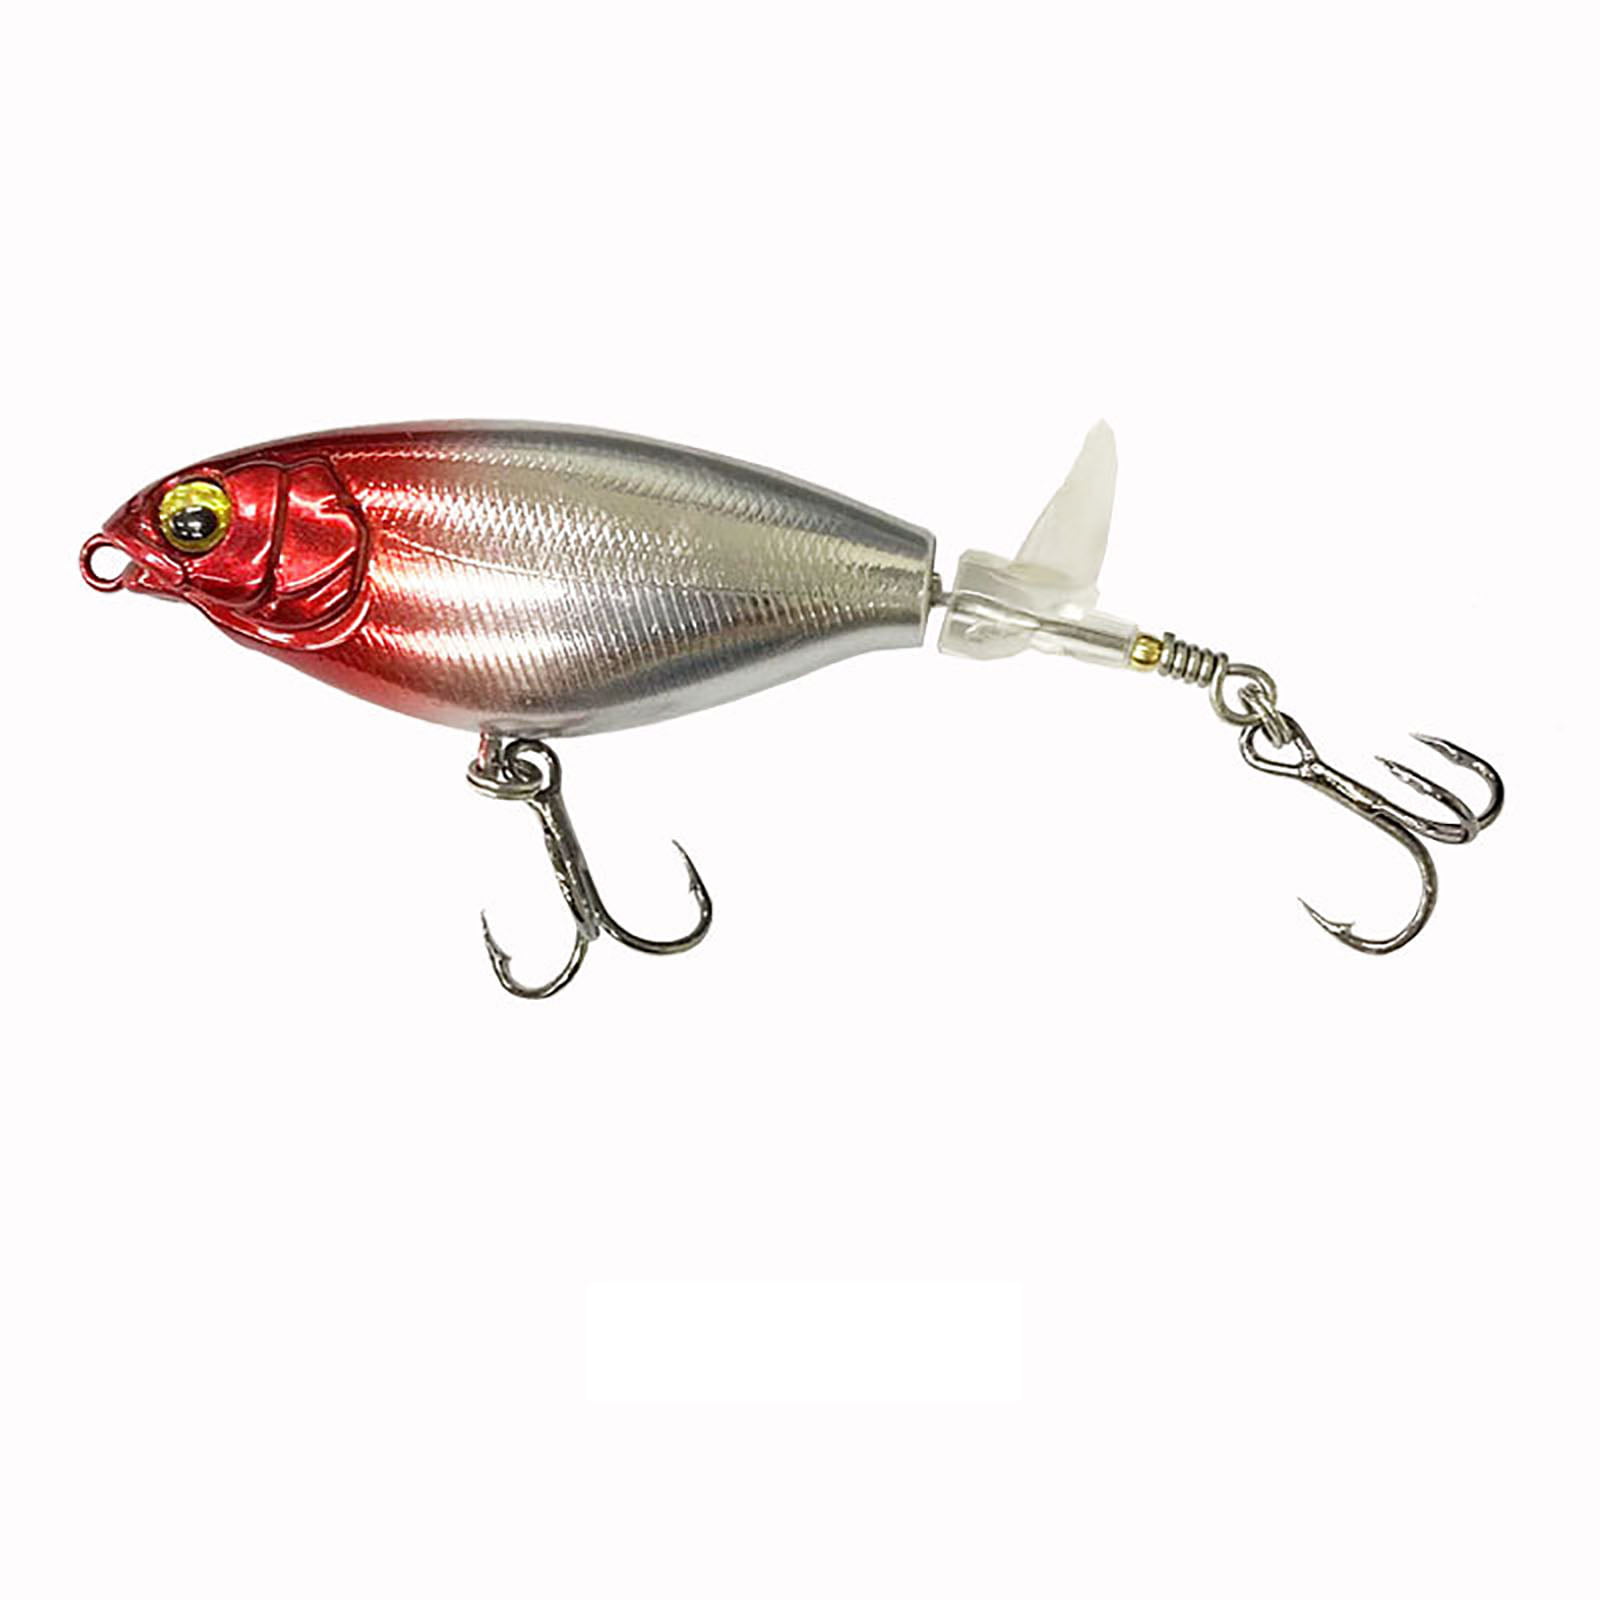 6.4g/11.9g Fishing Lures With Propeller Tail Long-casting Artificial Hard  Bait For Bass Catfish Pike Perch